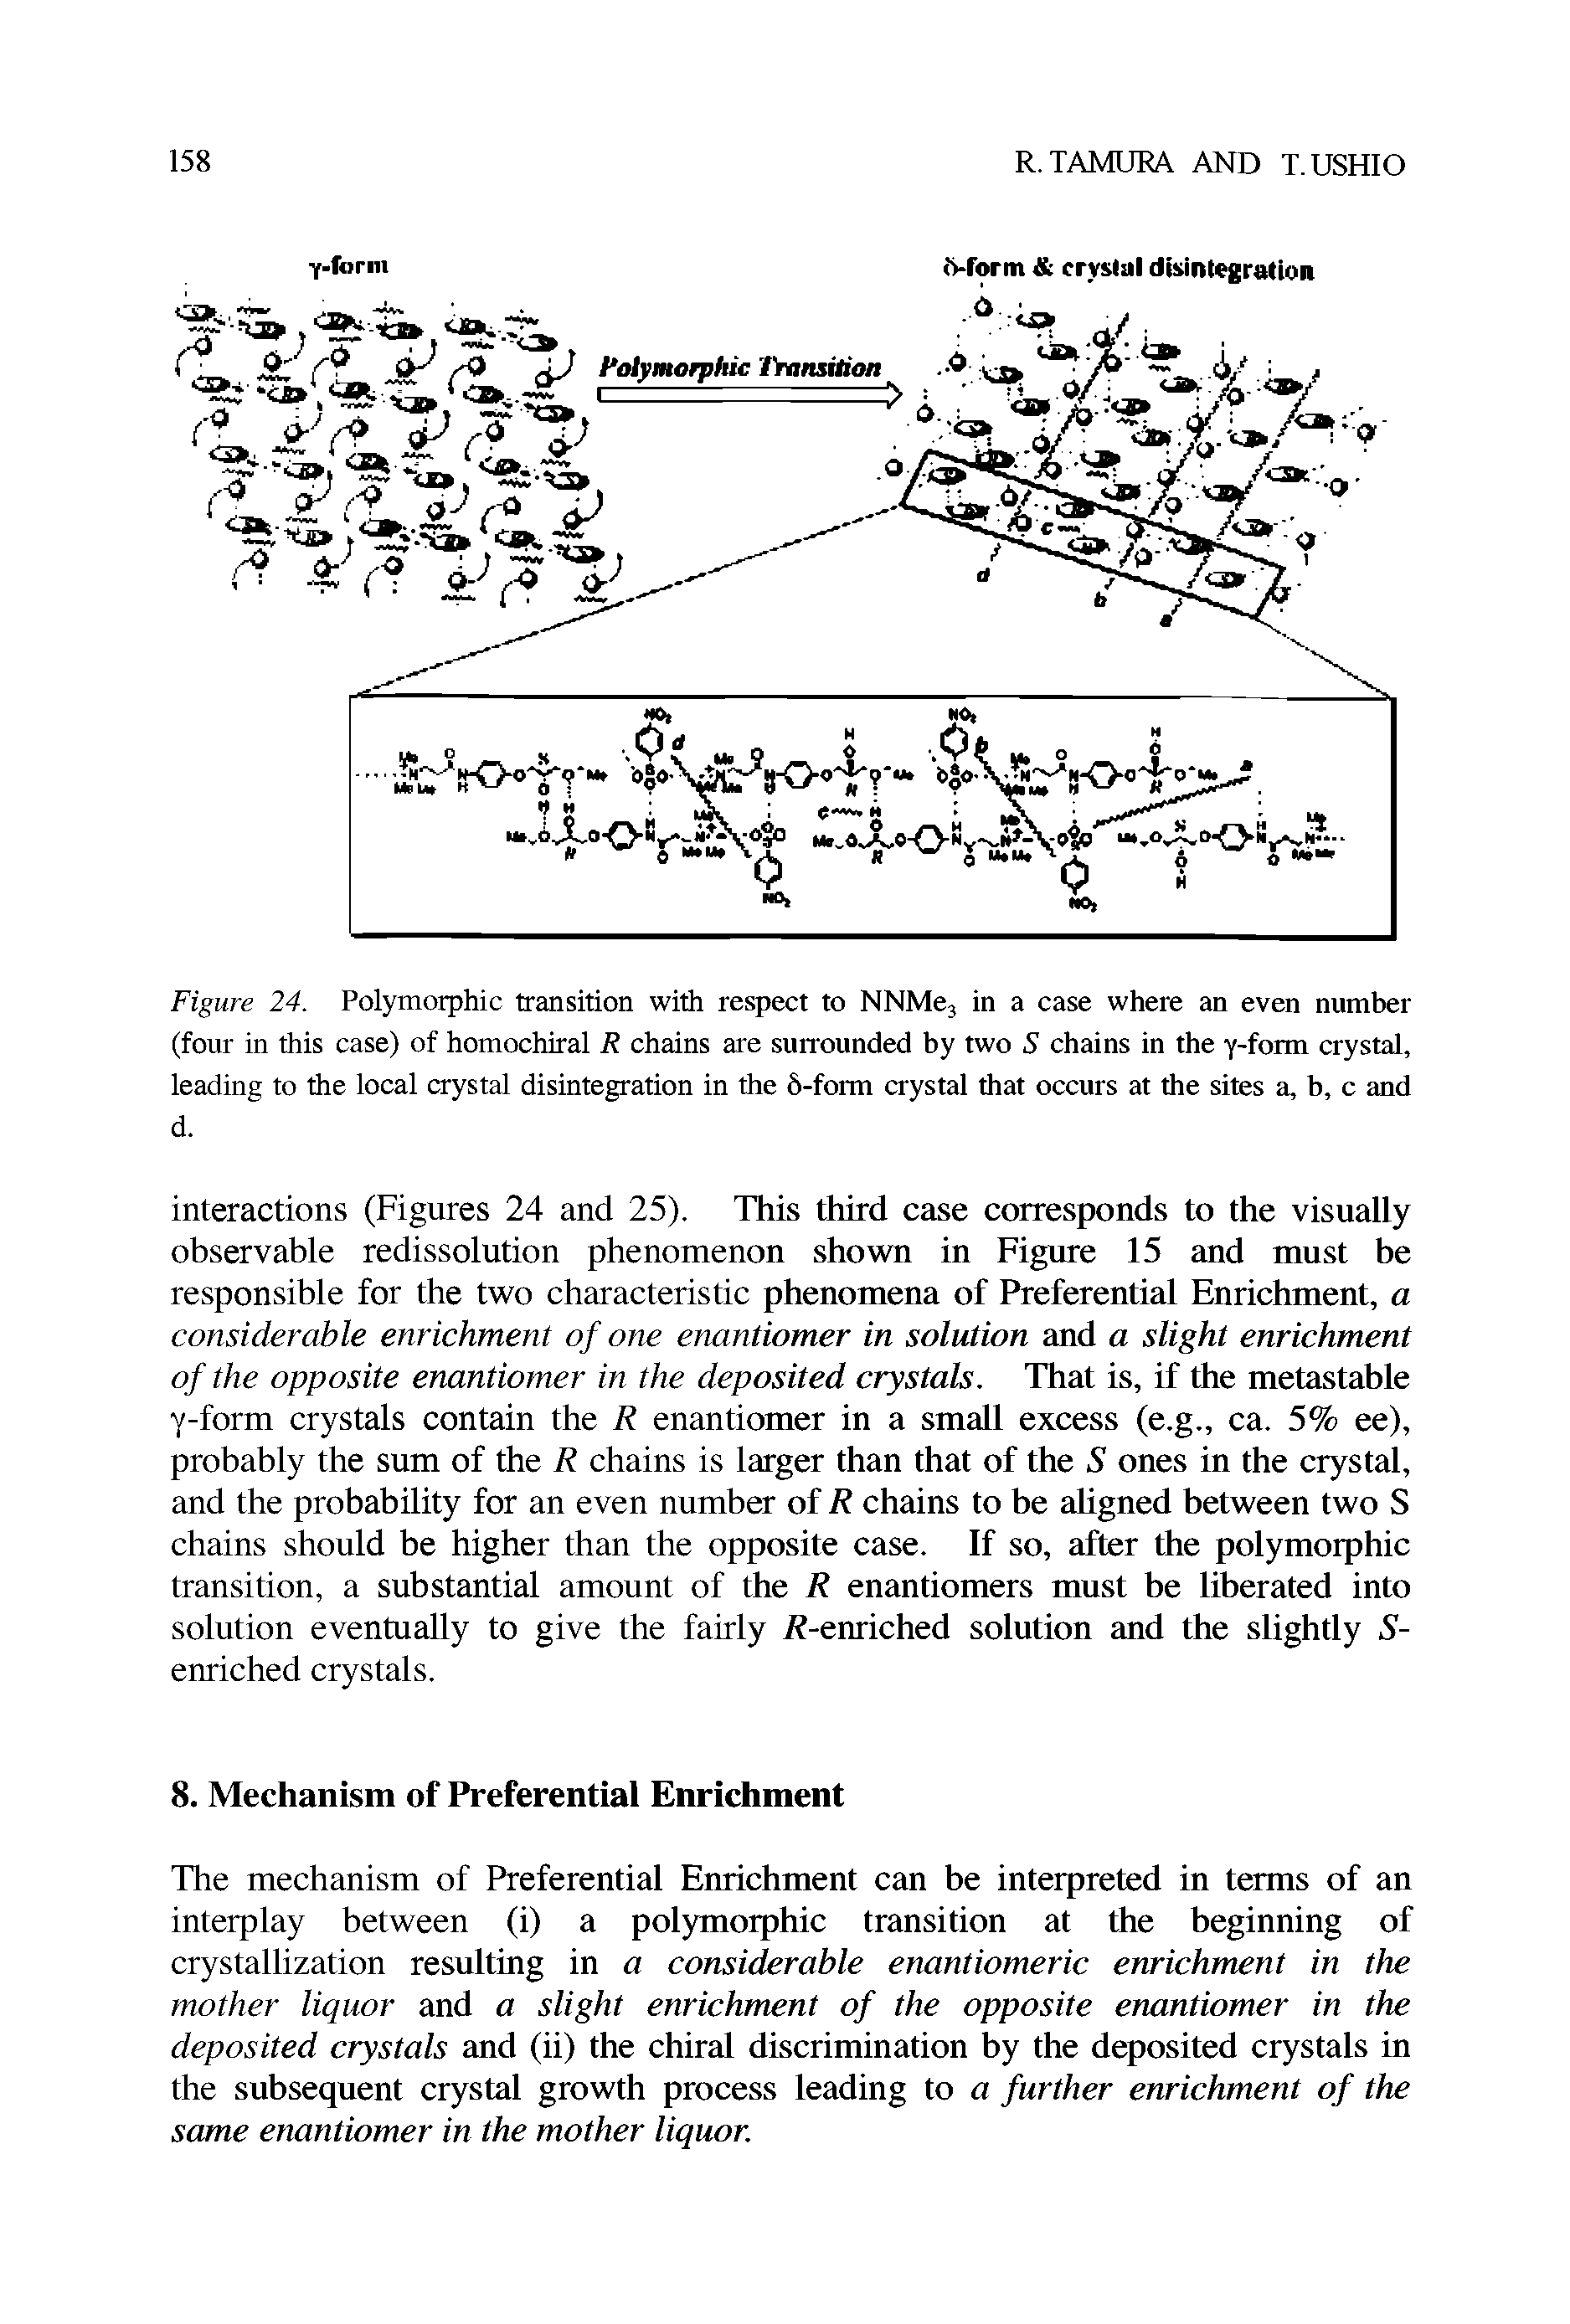 Figure 24. Polymorphic transition with respect to NNMe, in a case where an even number (four in this case) of homochiral R chains are surrounded by two S chains in the y-form crystal, leading to the local crystal disintegration in the 6-form crystal that occurs at the sites a, b, c and d.